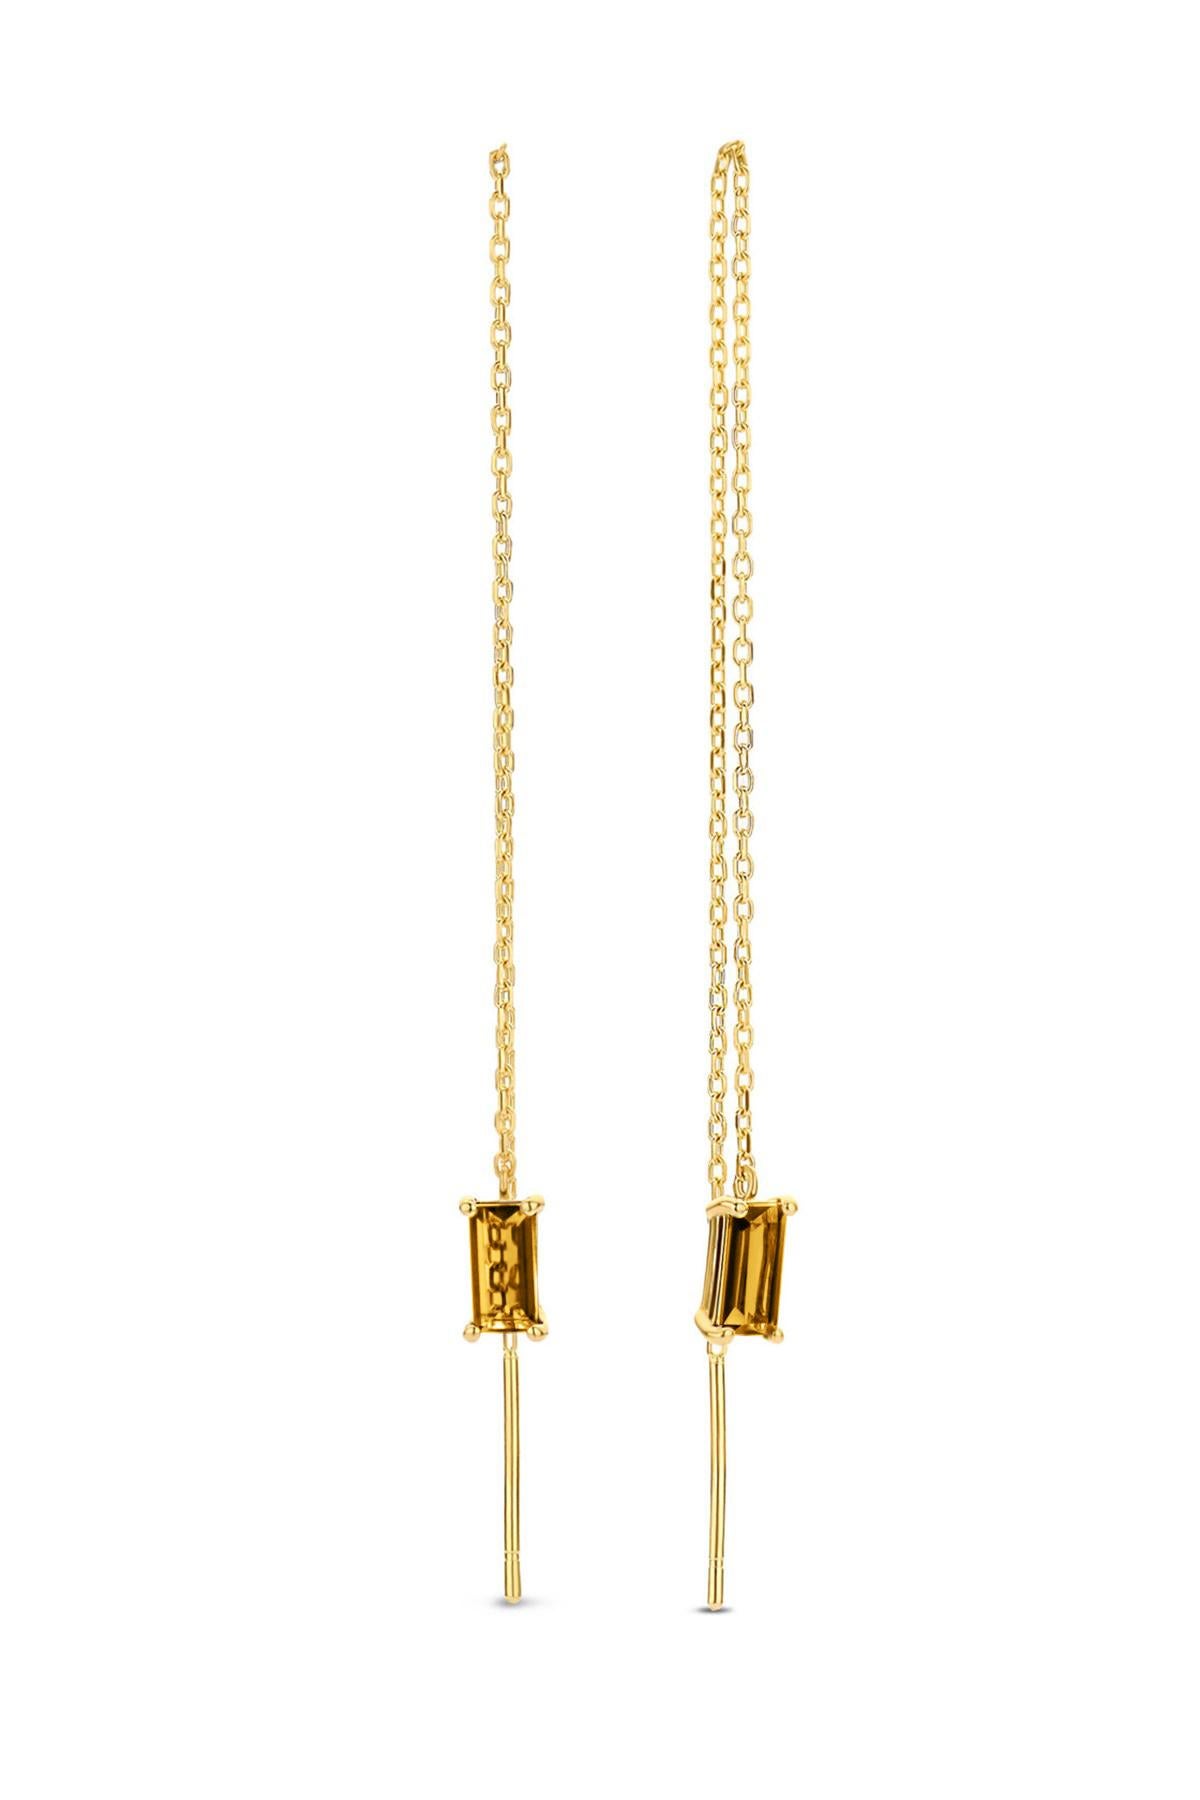 Modern 14k Solid Gold Drop Earrings with Citrine, Chain Gold Earrings For Sale